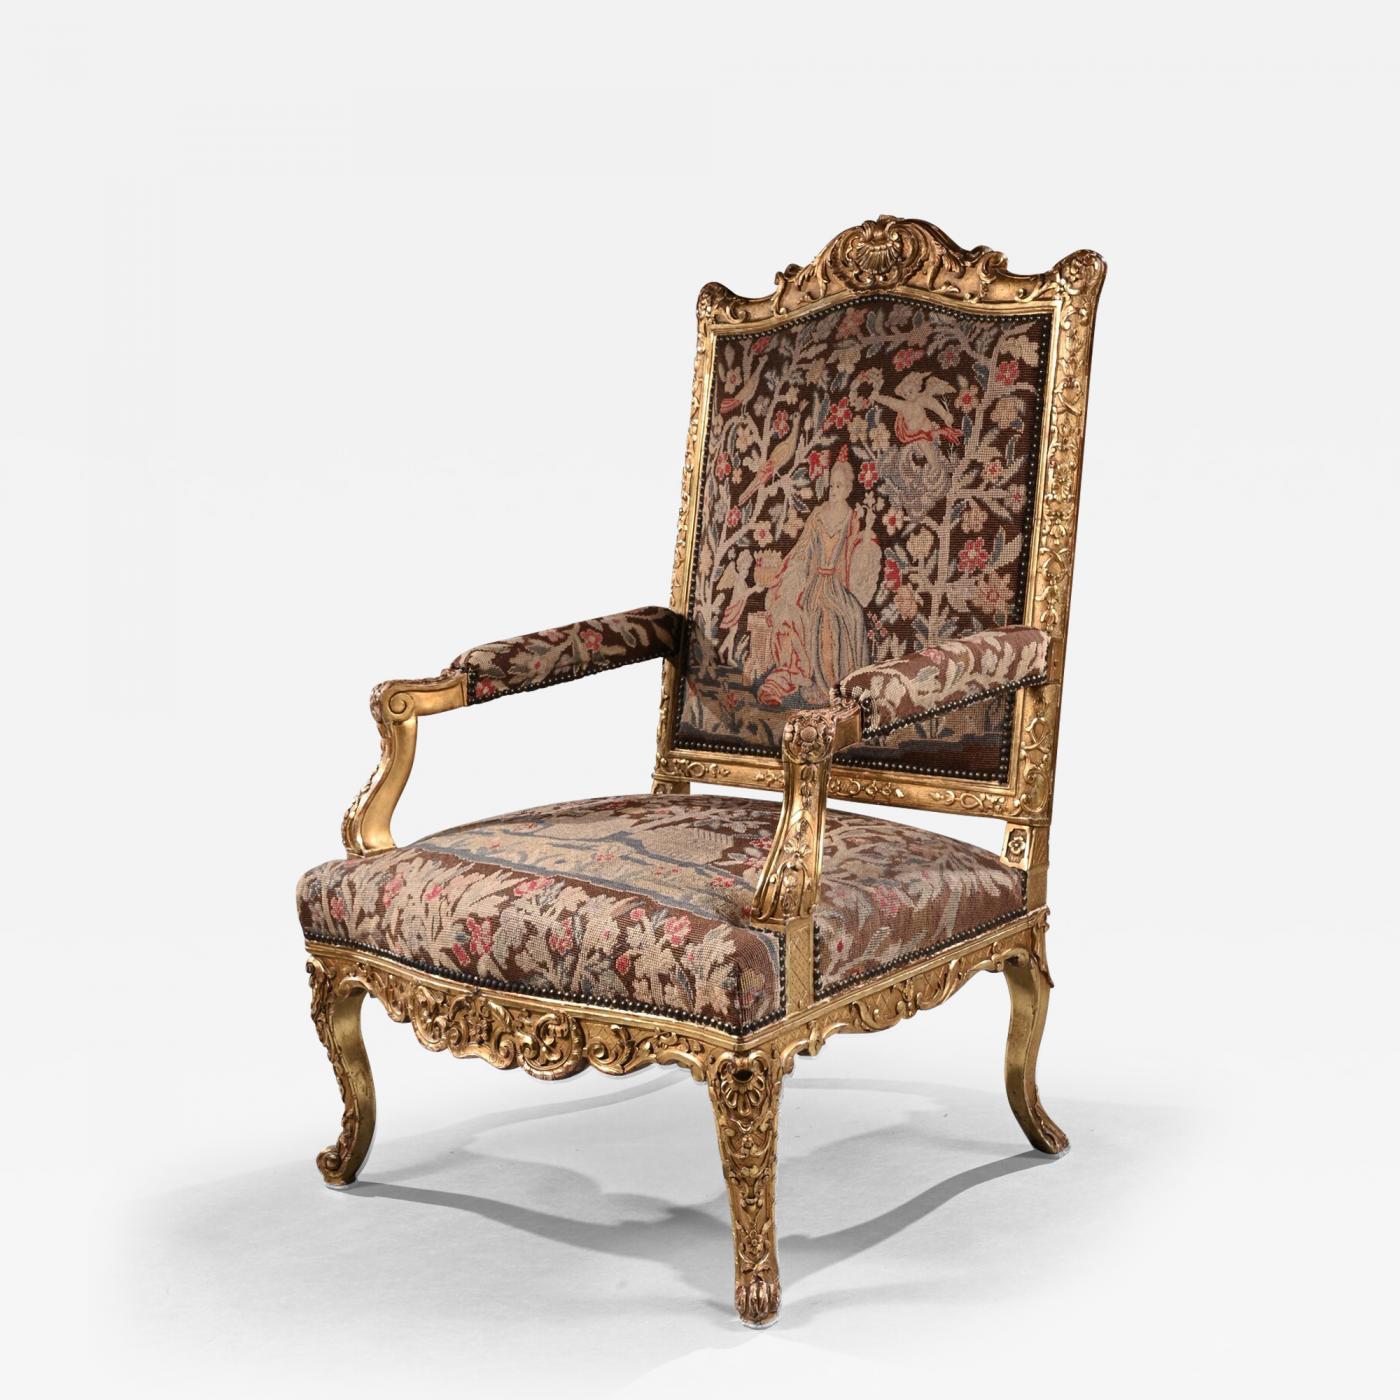 1900s Vintage French Louis XIV / Regency Style Arm Chairs With